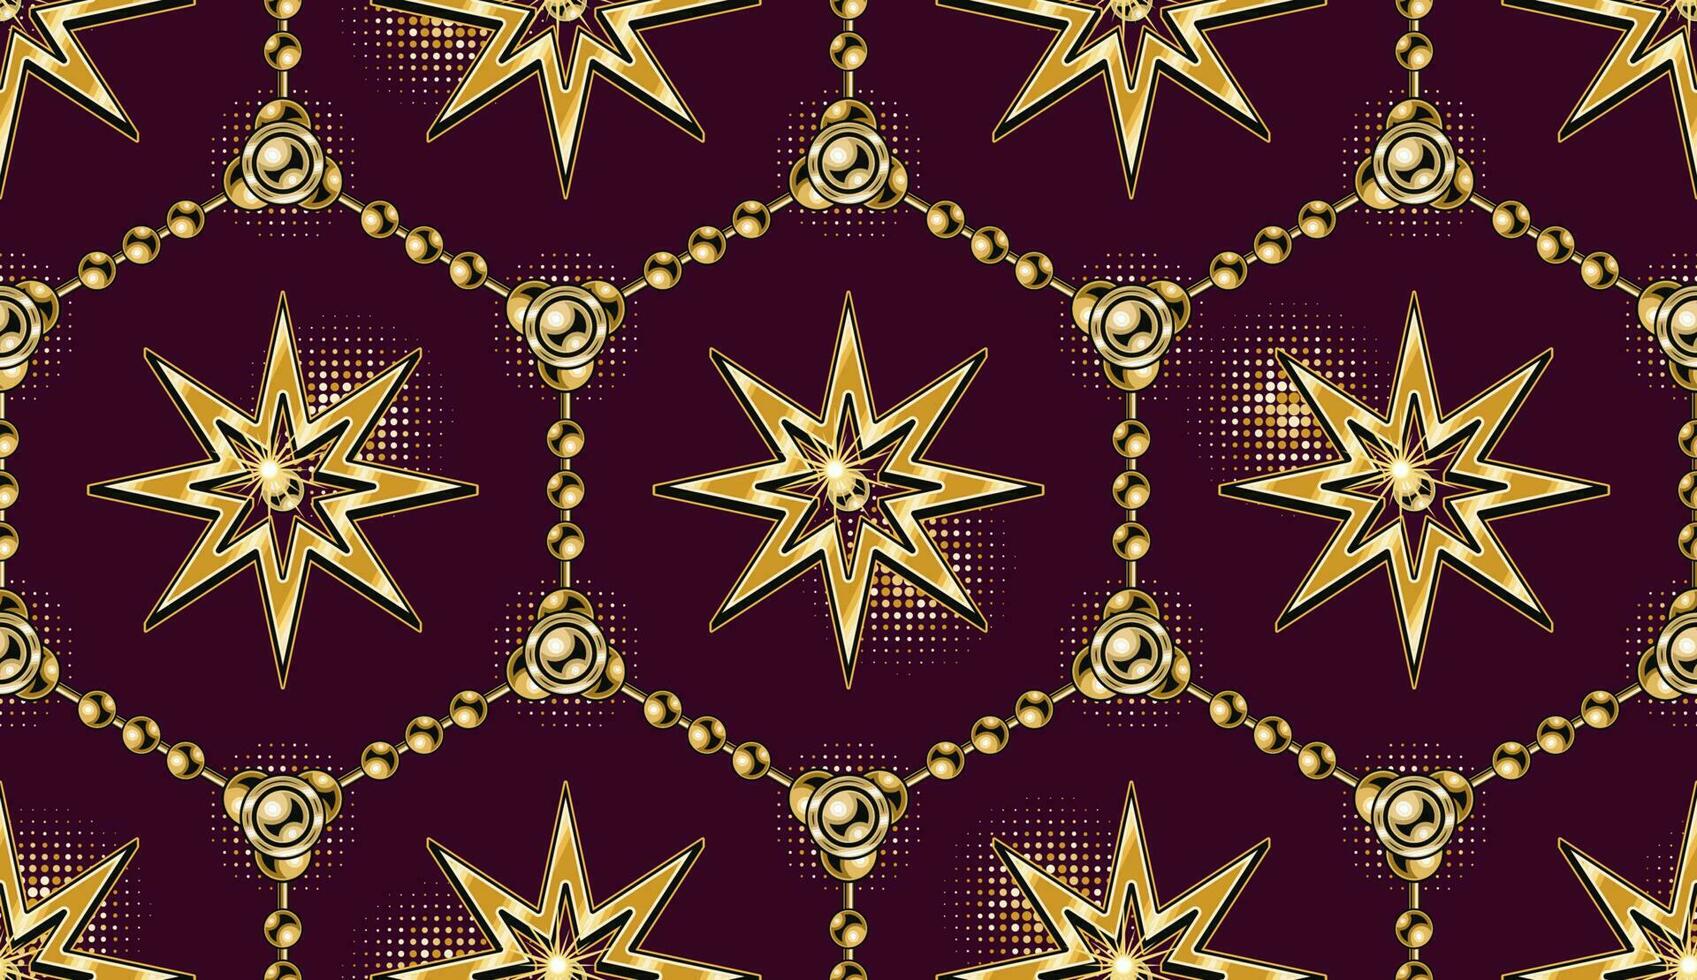 Seamless geometric pattern with hexagonal grid with golden chains, shiny stars, halftone shapes on dark red background. Vector illustration in vintage style.